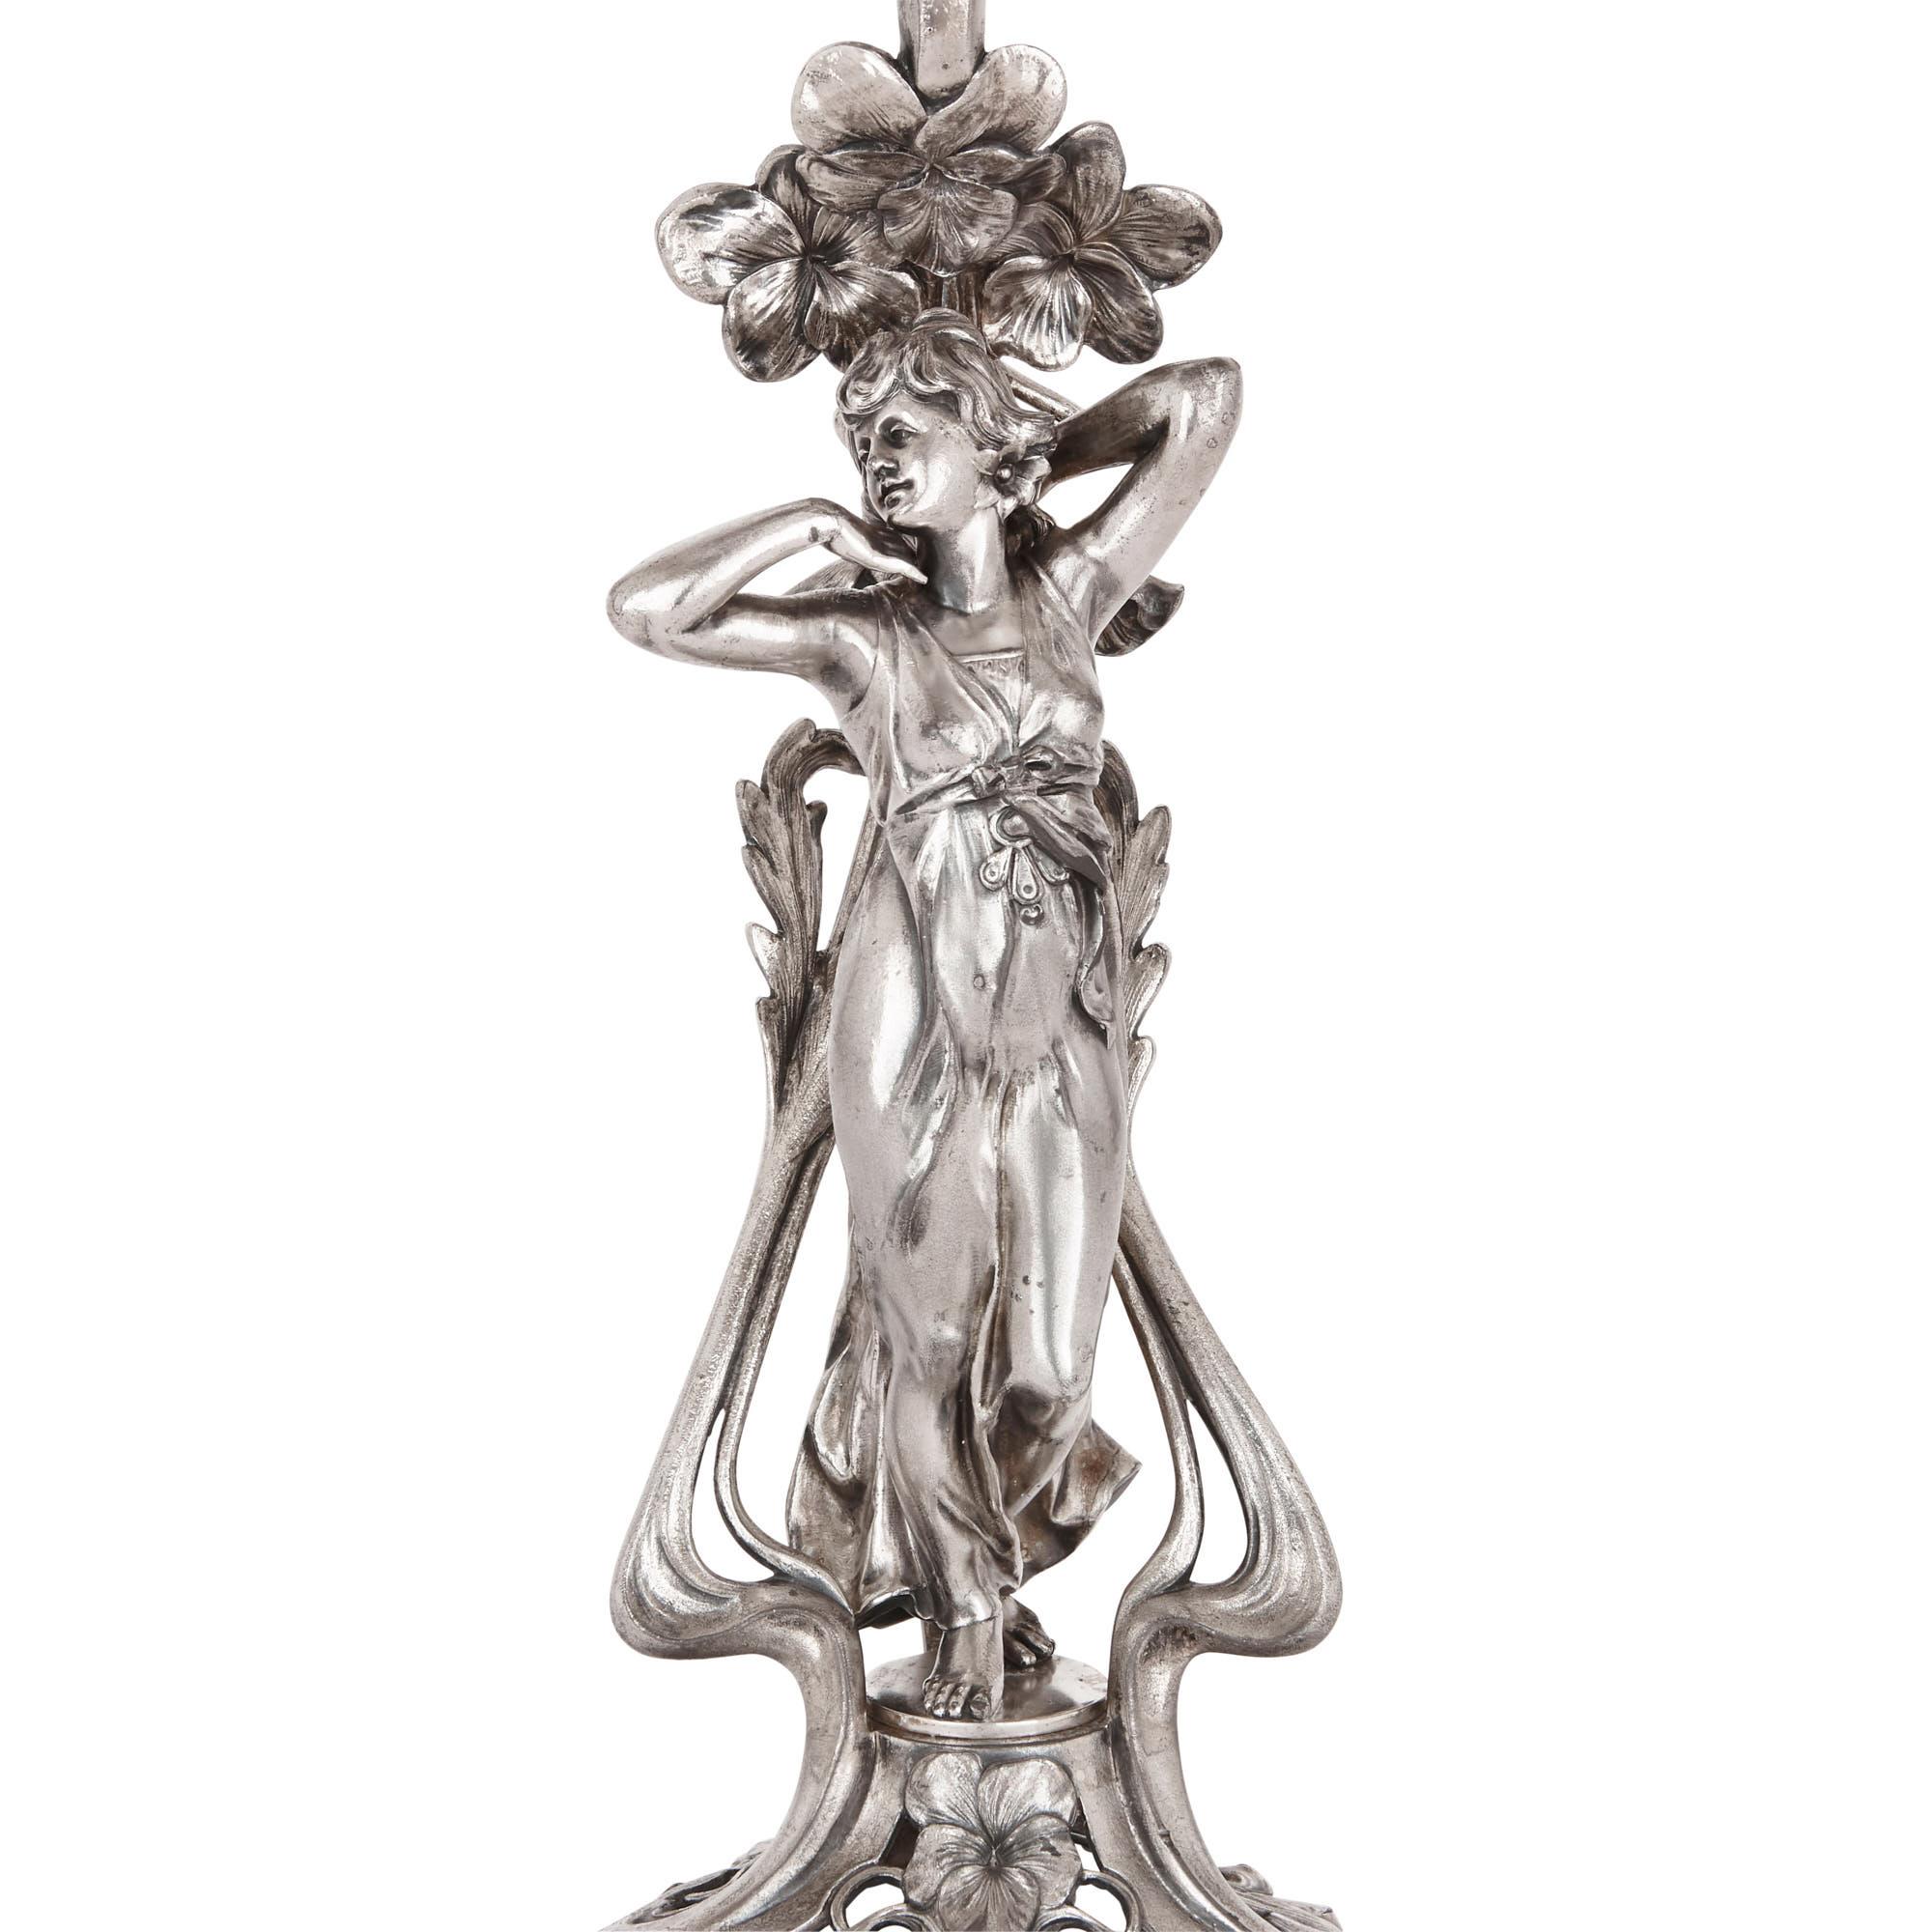 This graceful centrepiece was created in the early 20th century by the German company, Württembergische Metallwarenfabrik (WMF). WMF was a prestigious factory which produced metal Jugendstil or Art Nouveau style decorative art. This beautiful